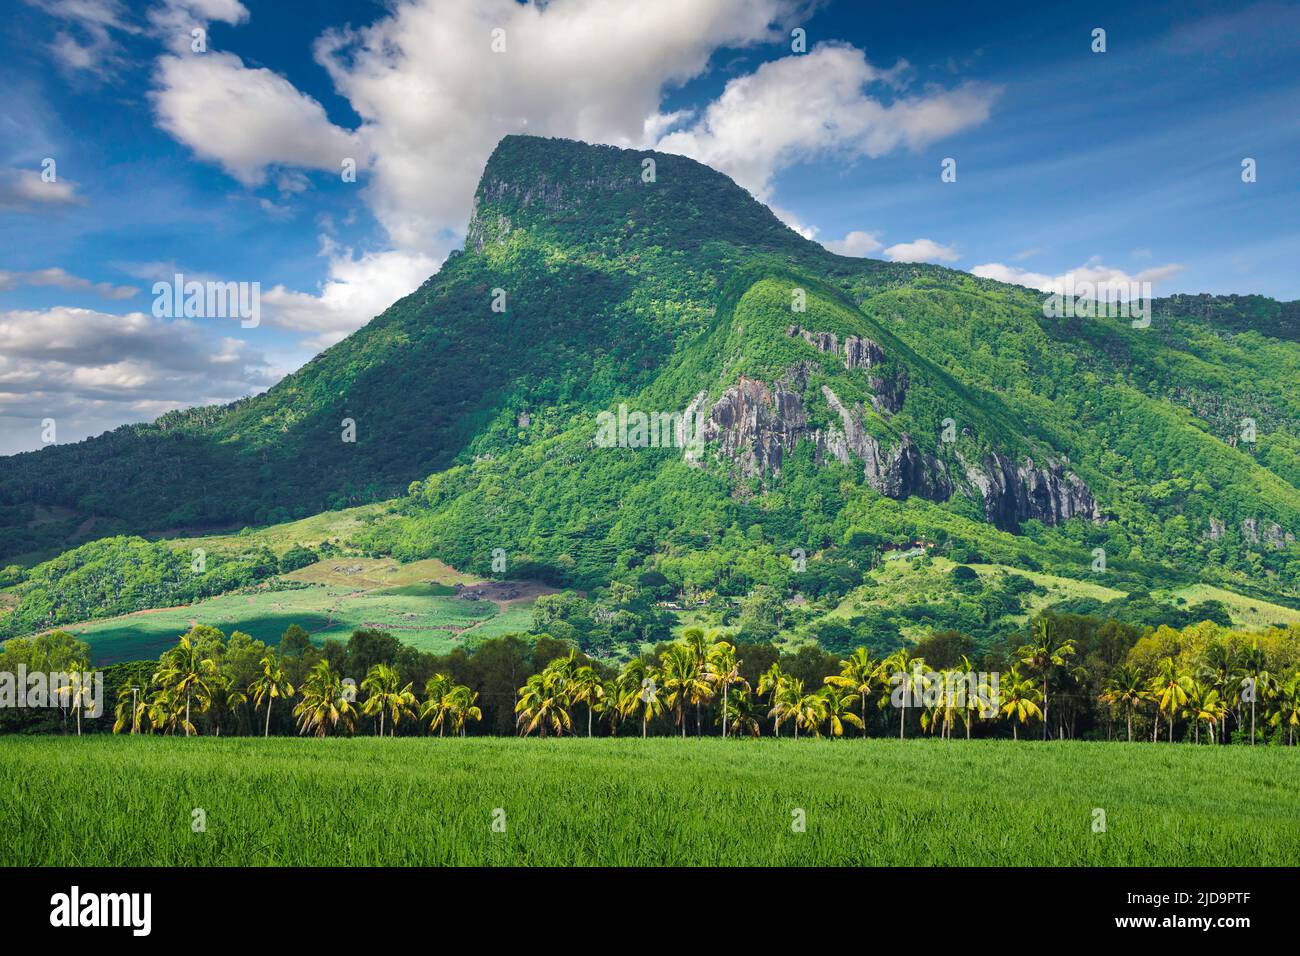 Lion mountain with green sugar cane field foreground on the beautiful tropical paradise island, Mauritius Stock Photo